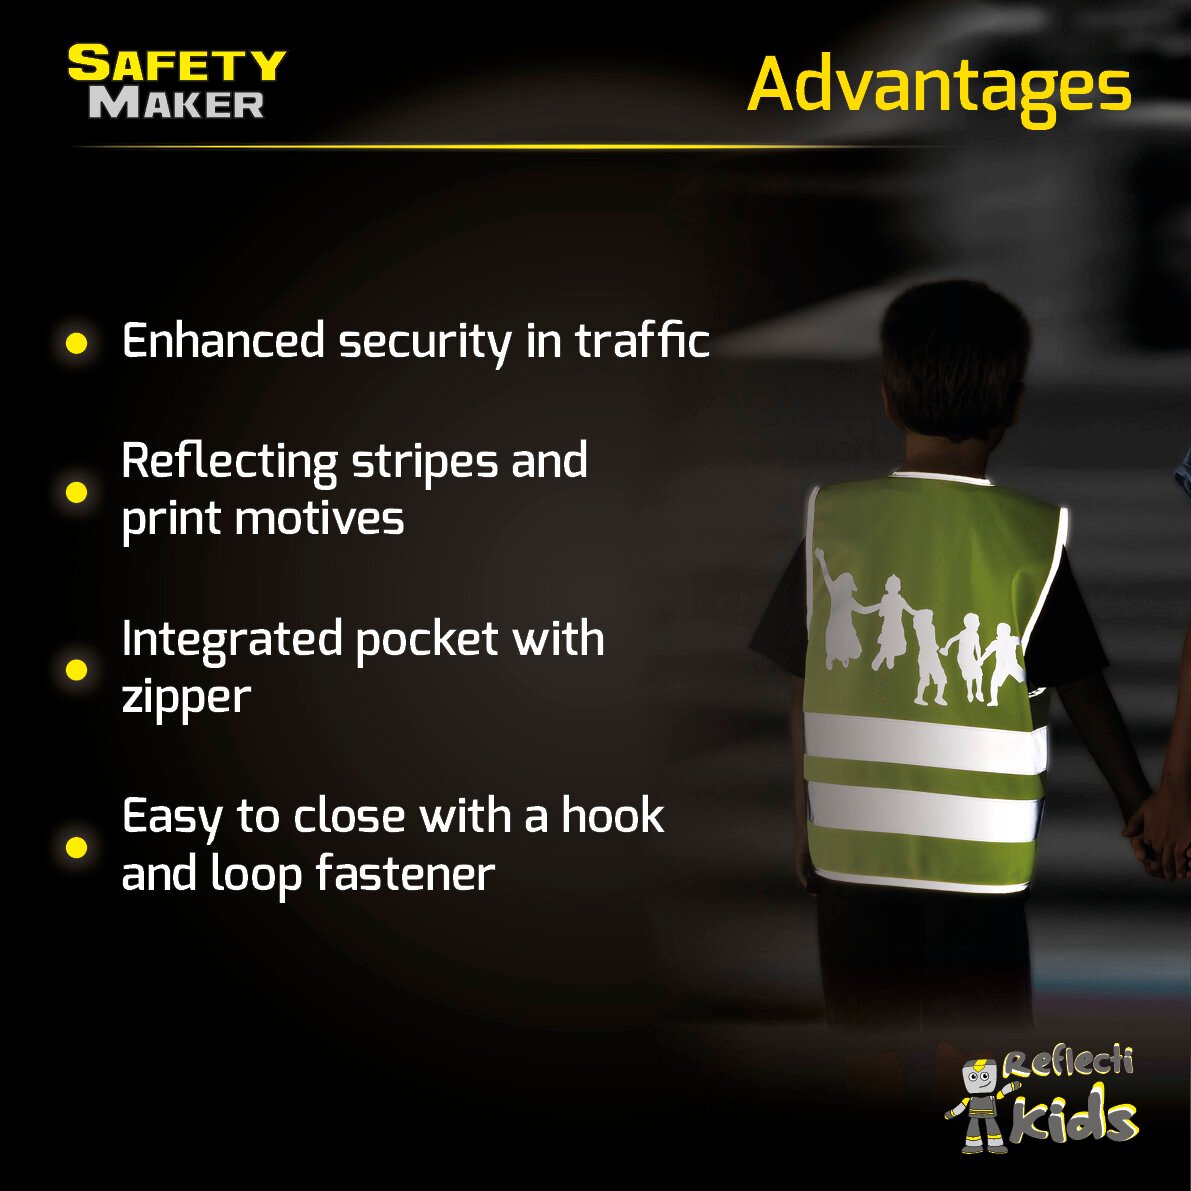 safety vest 3-6 years Jumping Kids